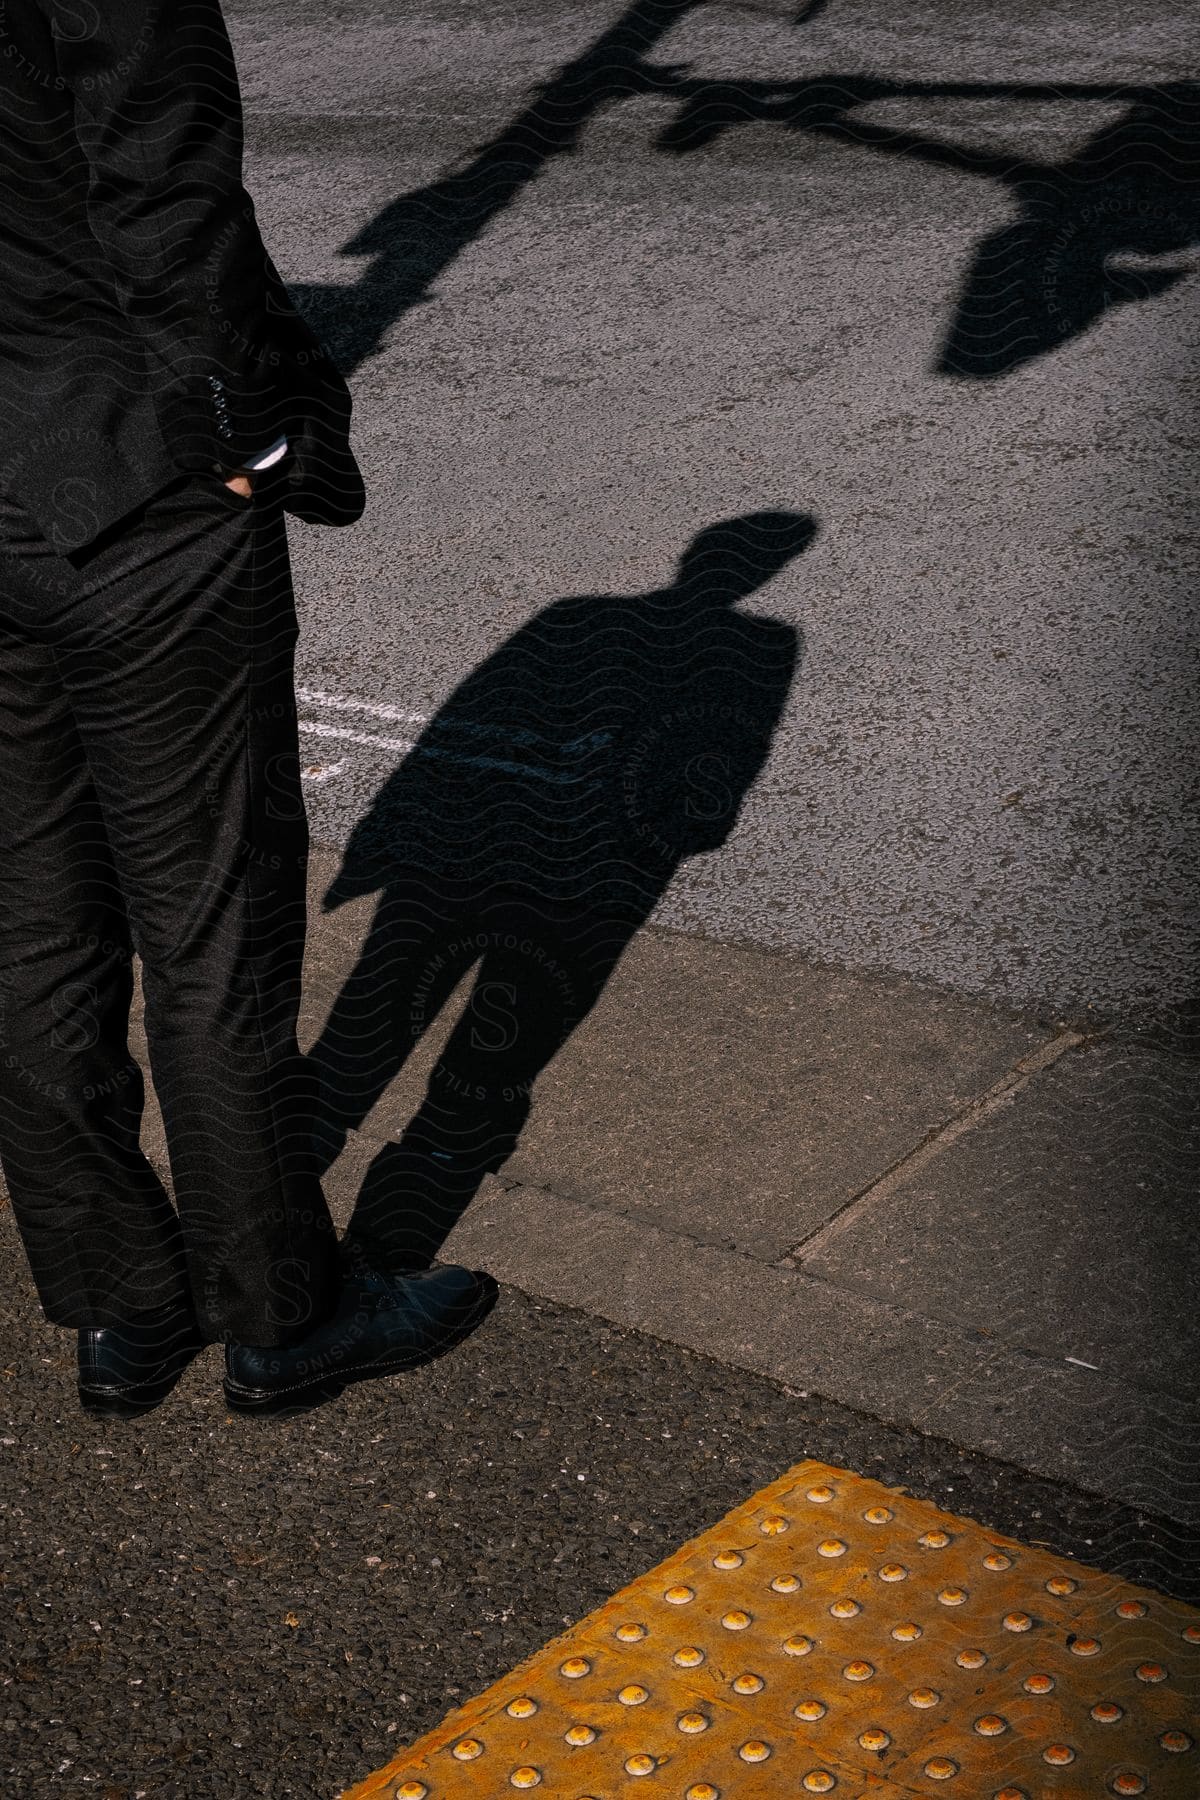 A man wearing a suit stands at a crosswalk